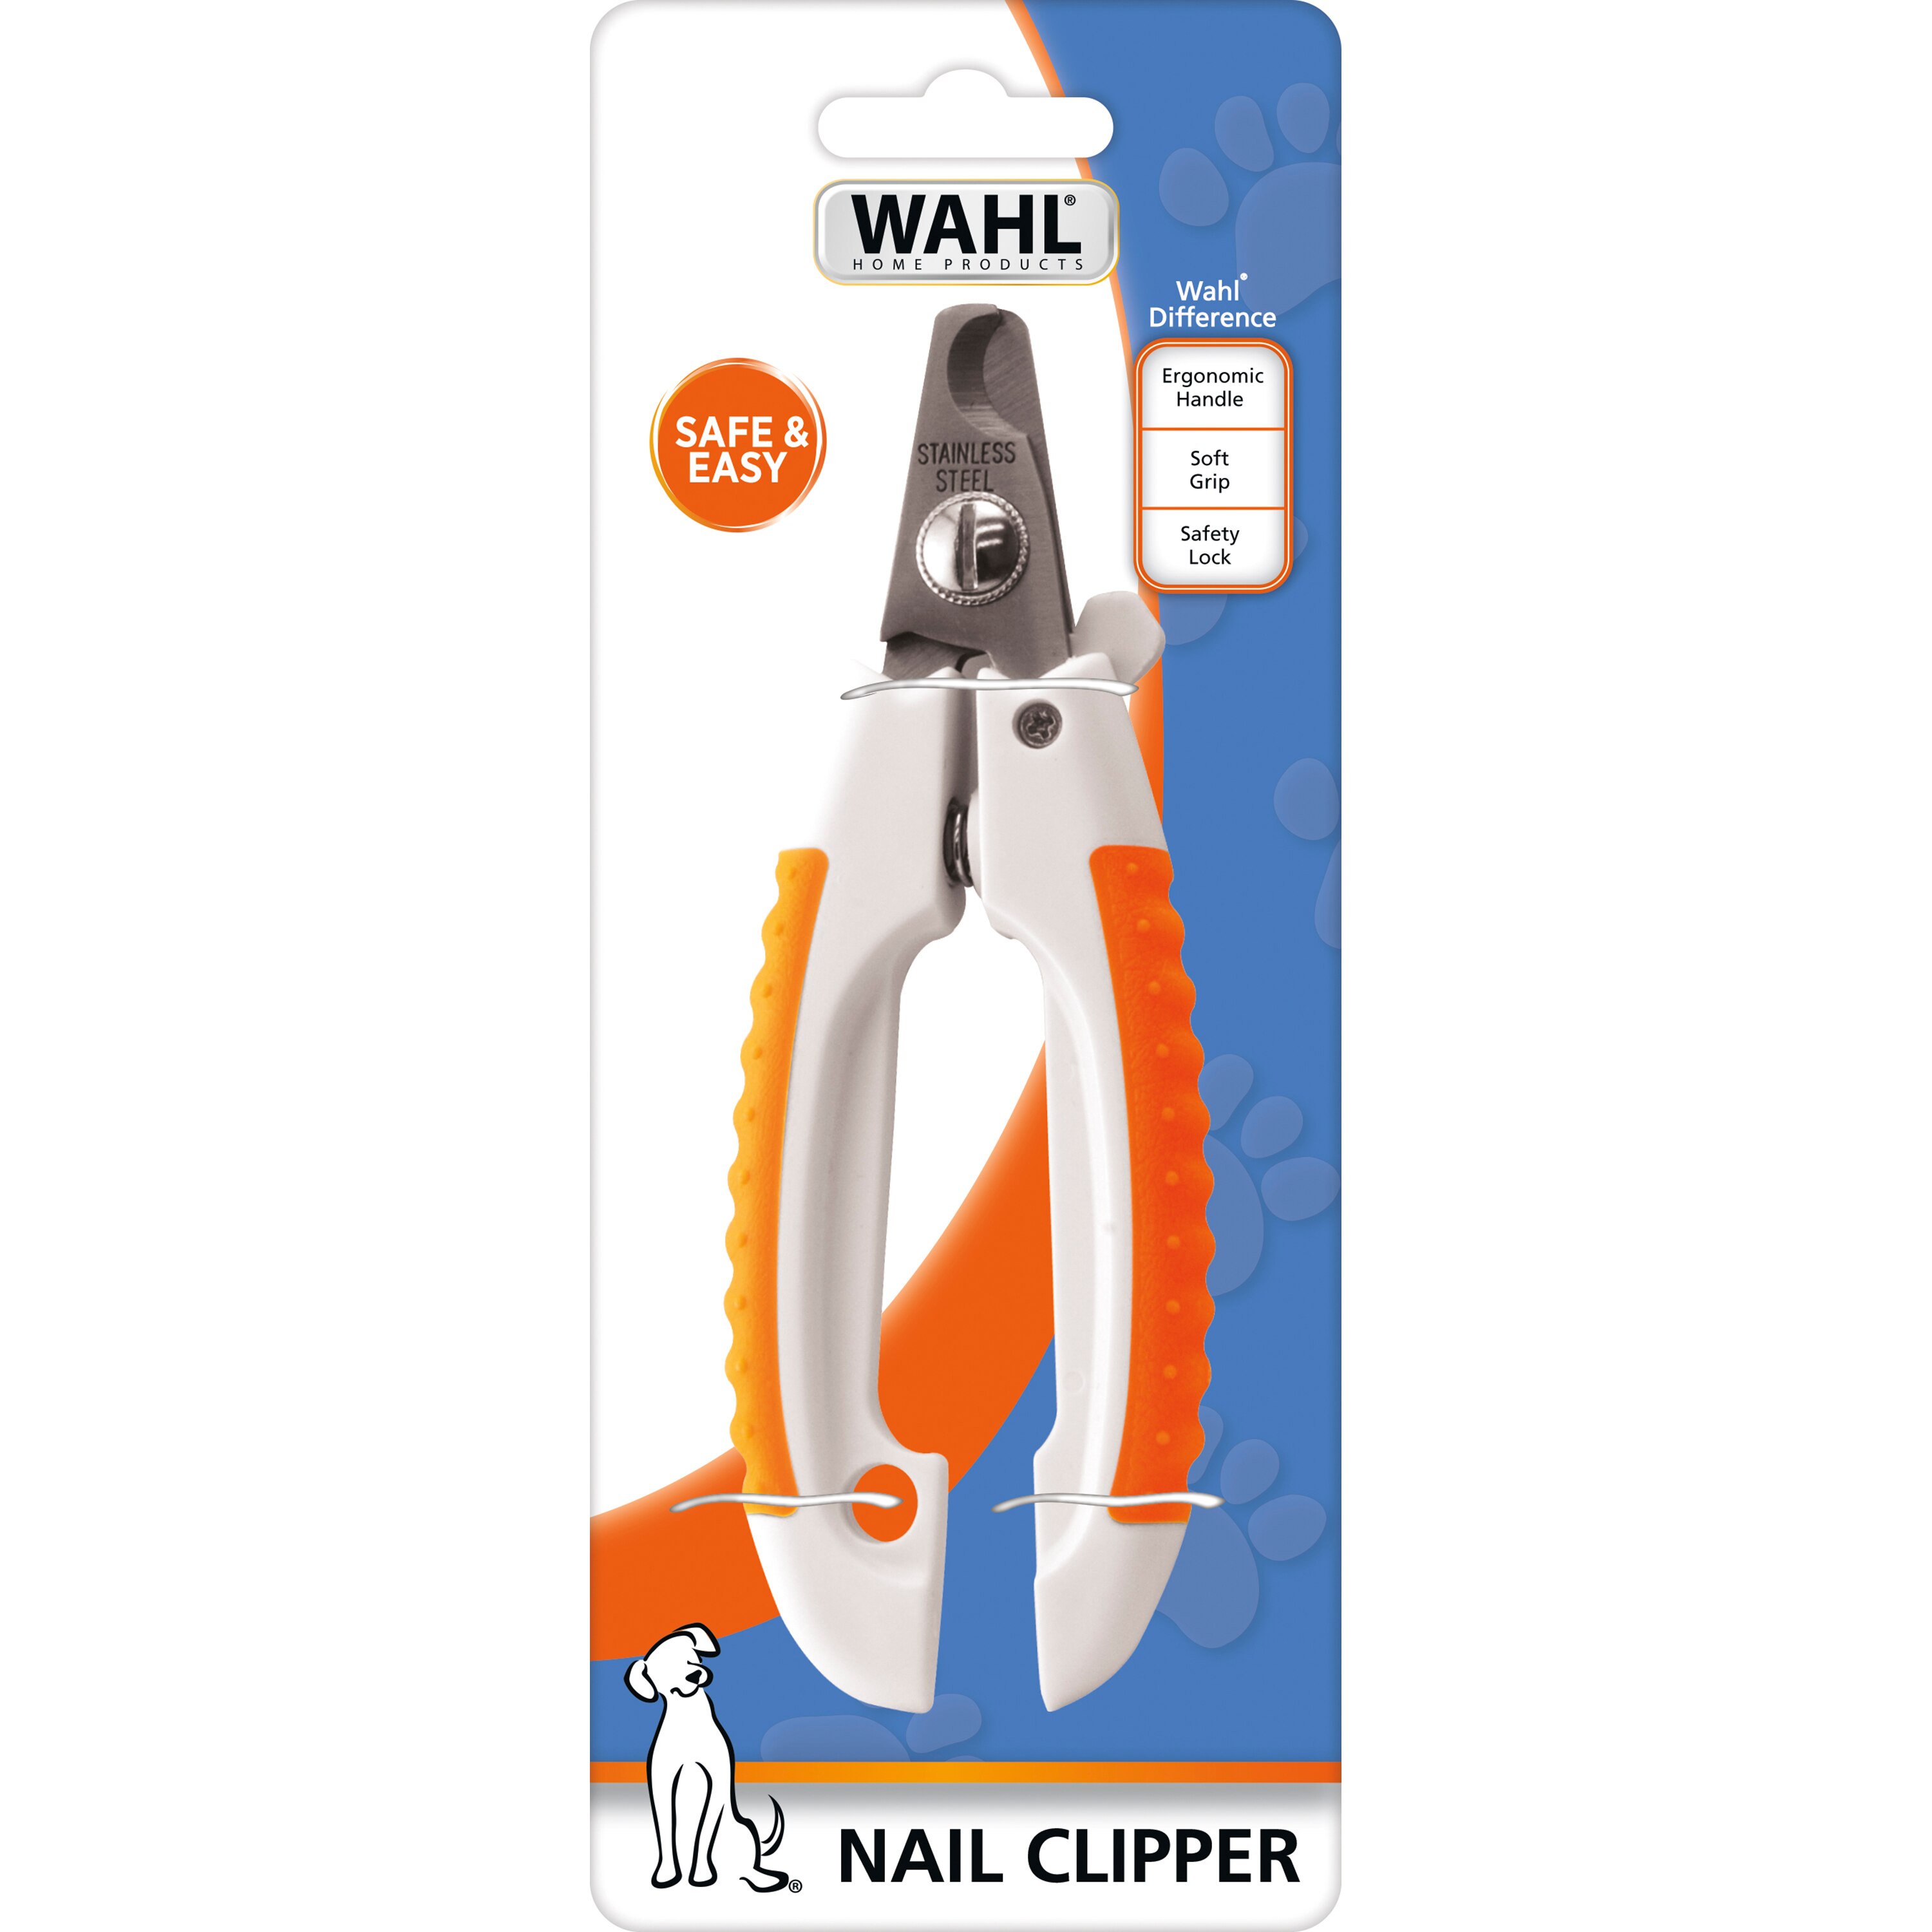 Wahl Pet Nail Clipper for Cutting Dog, Cat, & Animal Claws